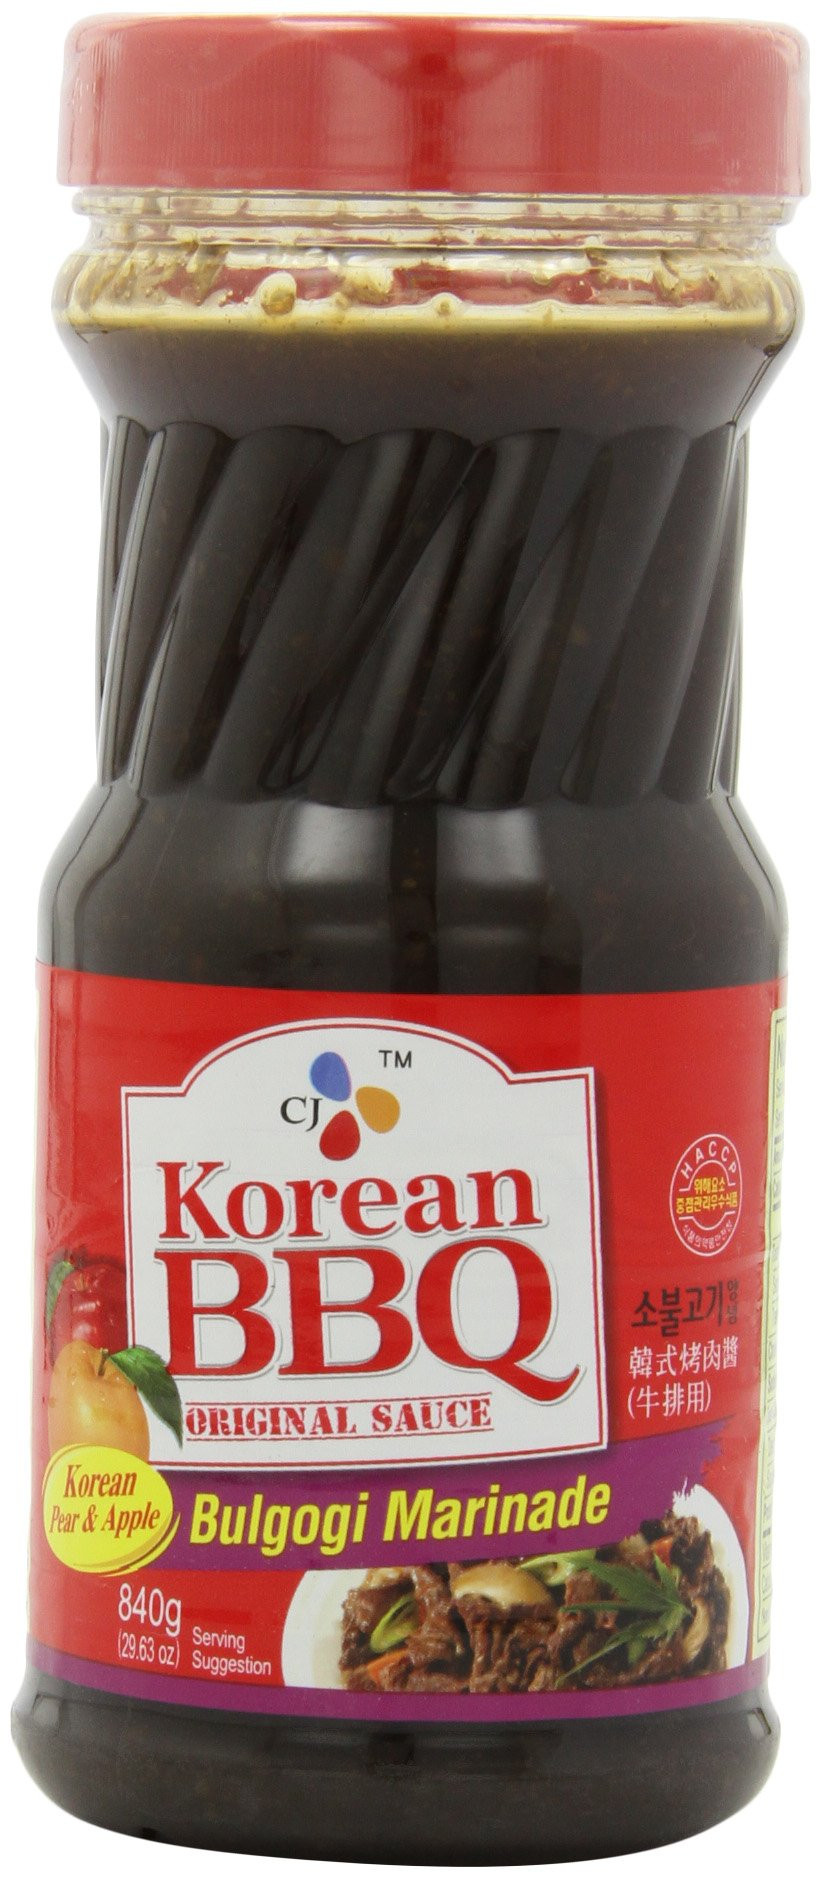 22 Best Korean Bbq Sauce - Best Recipes Ideas and Collections